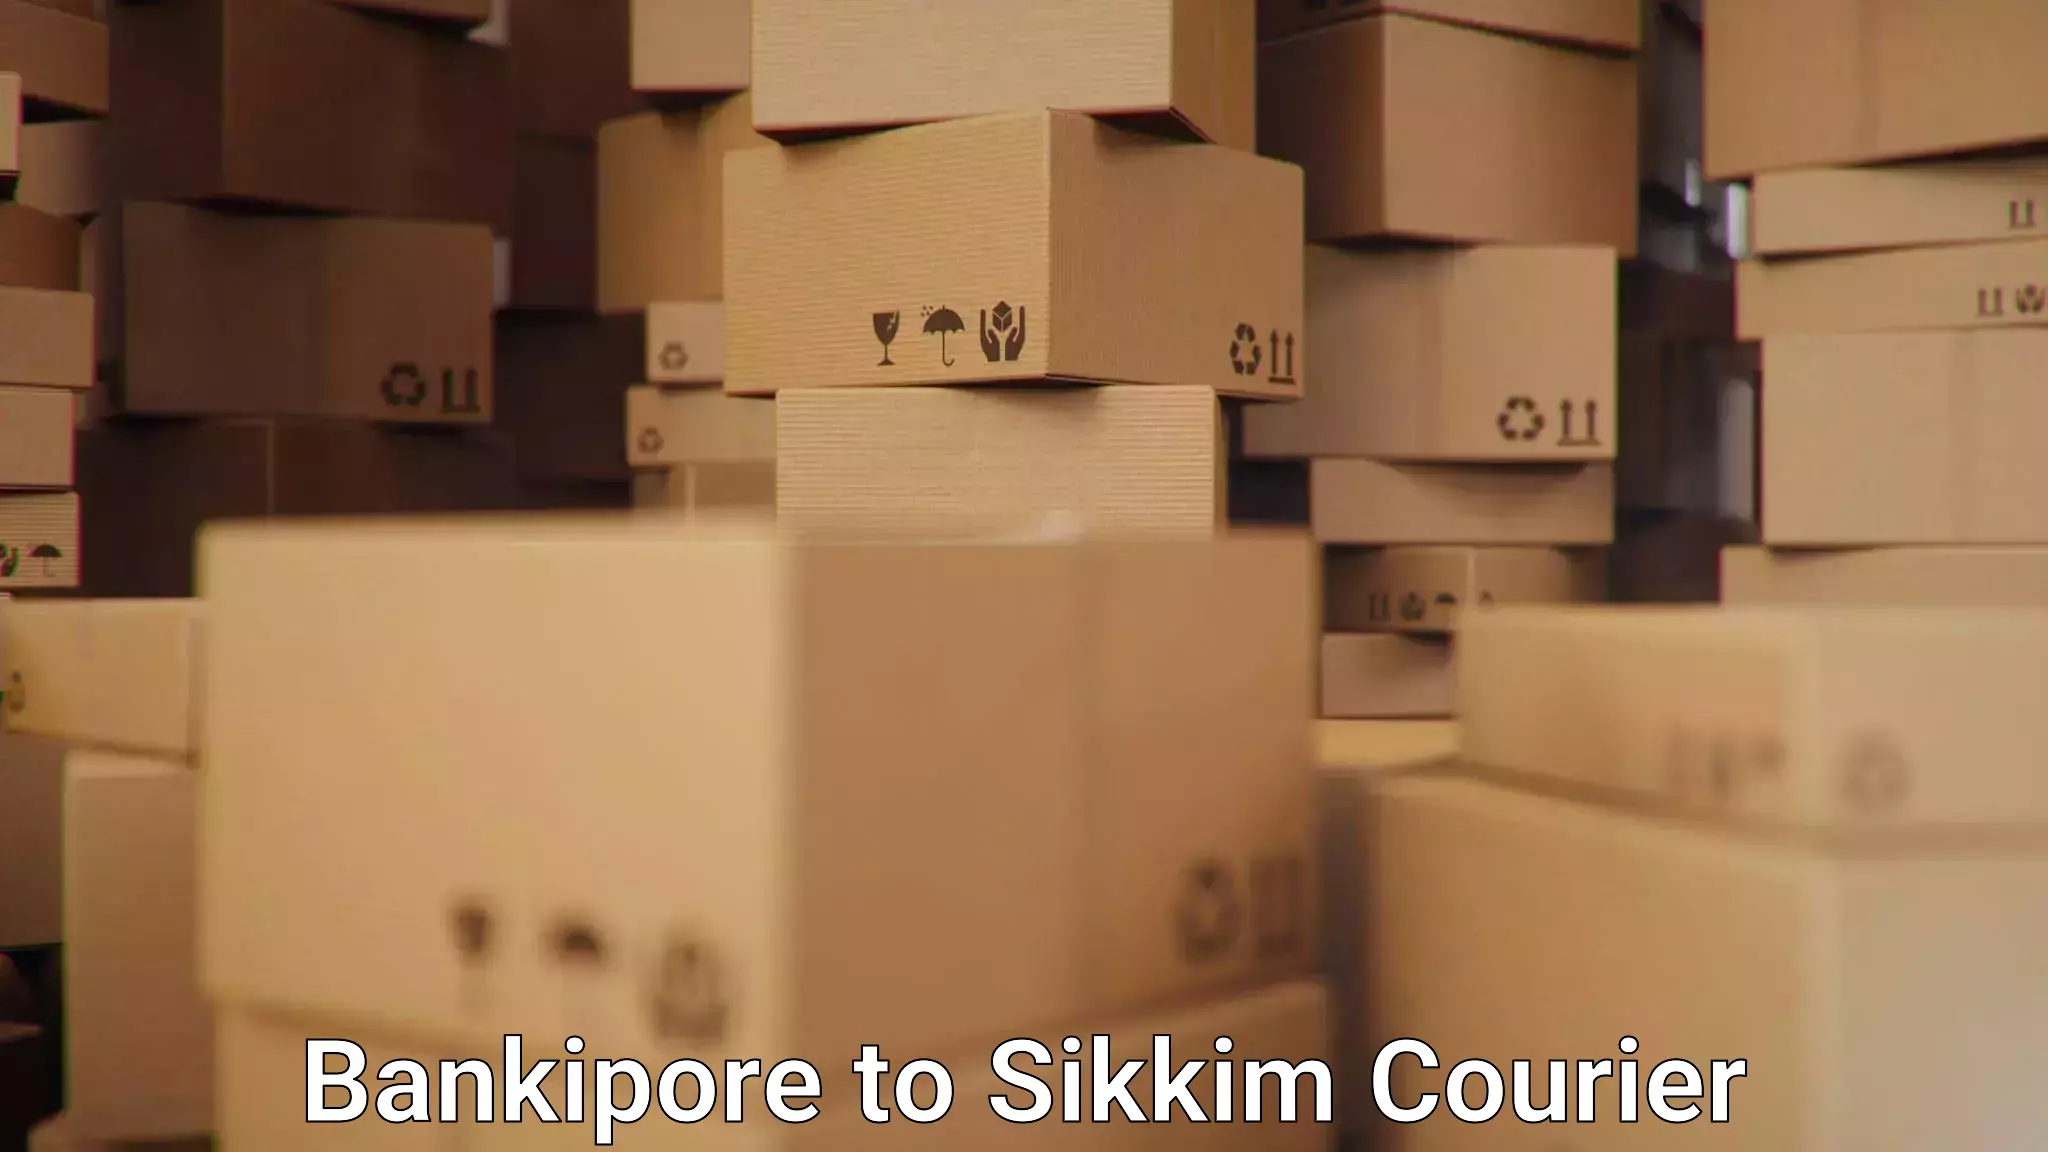 Residential courier service Bankipore to North Sikkim